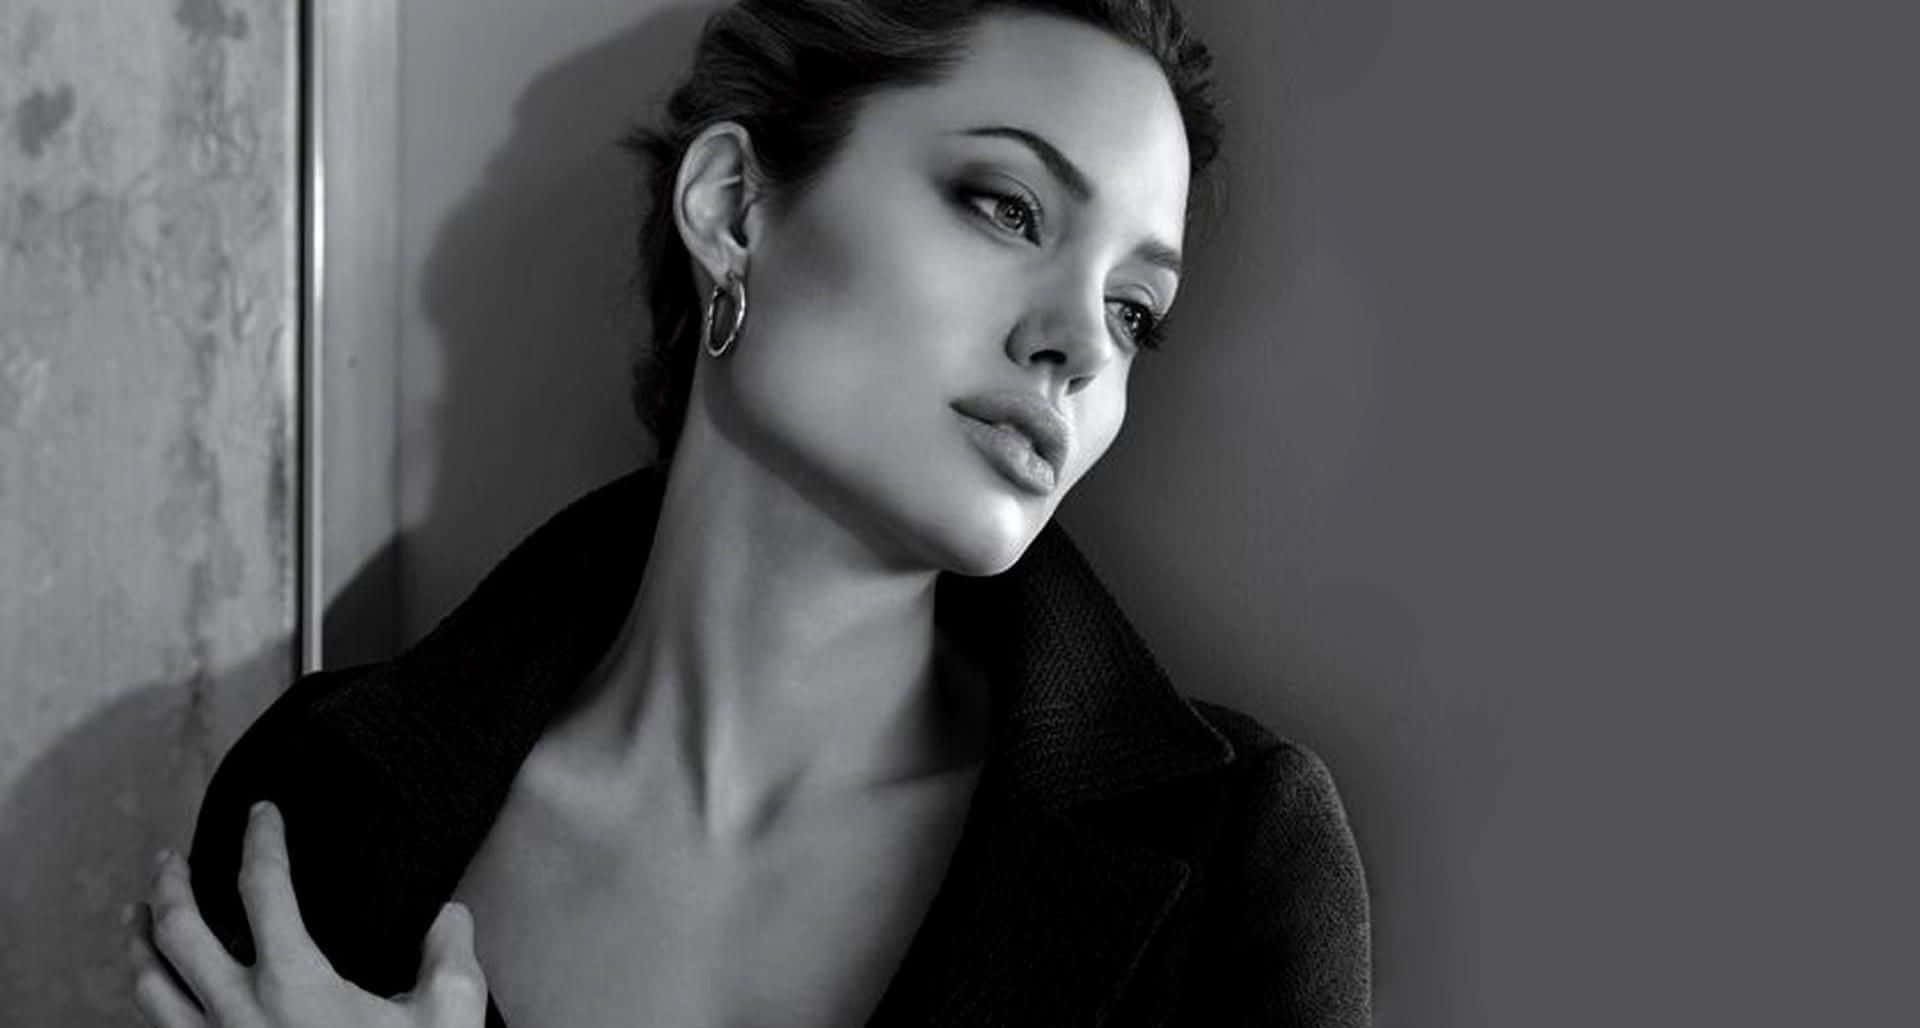 "Angelina Jolie looks regal in this picture"